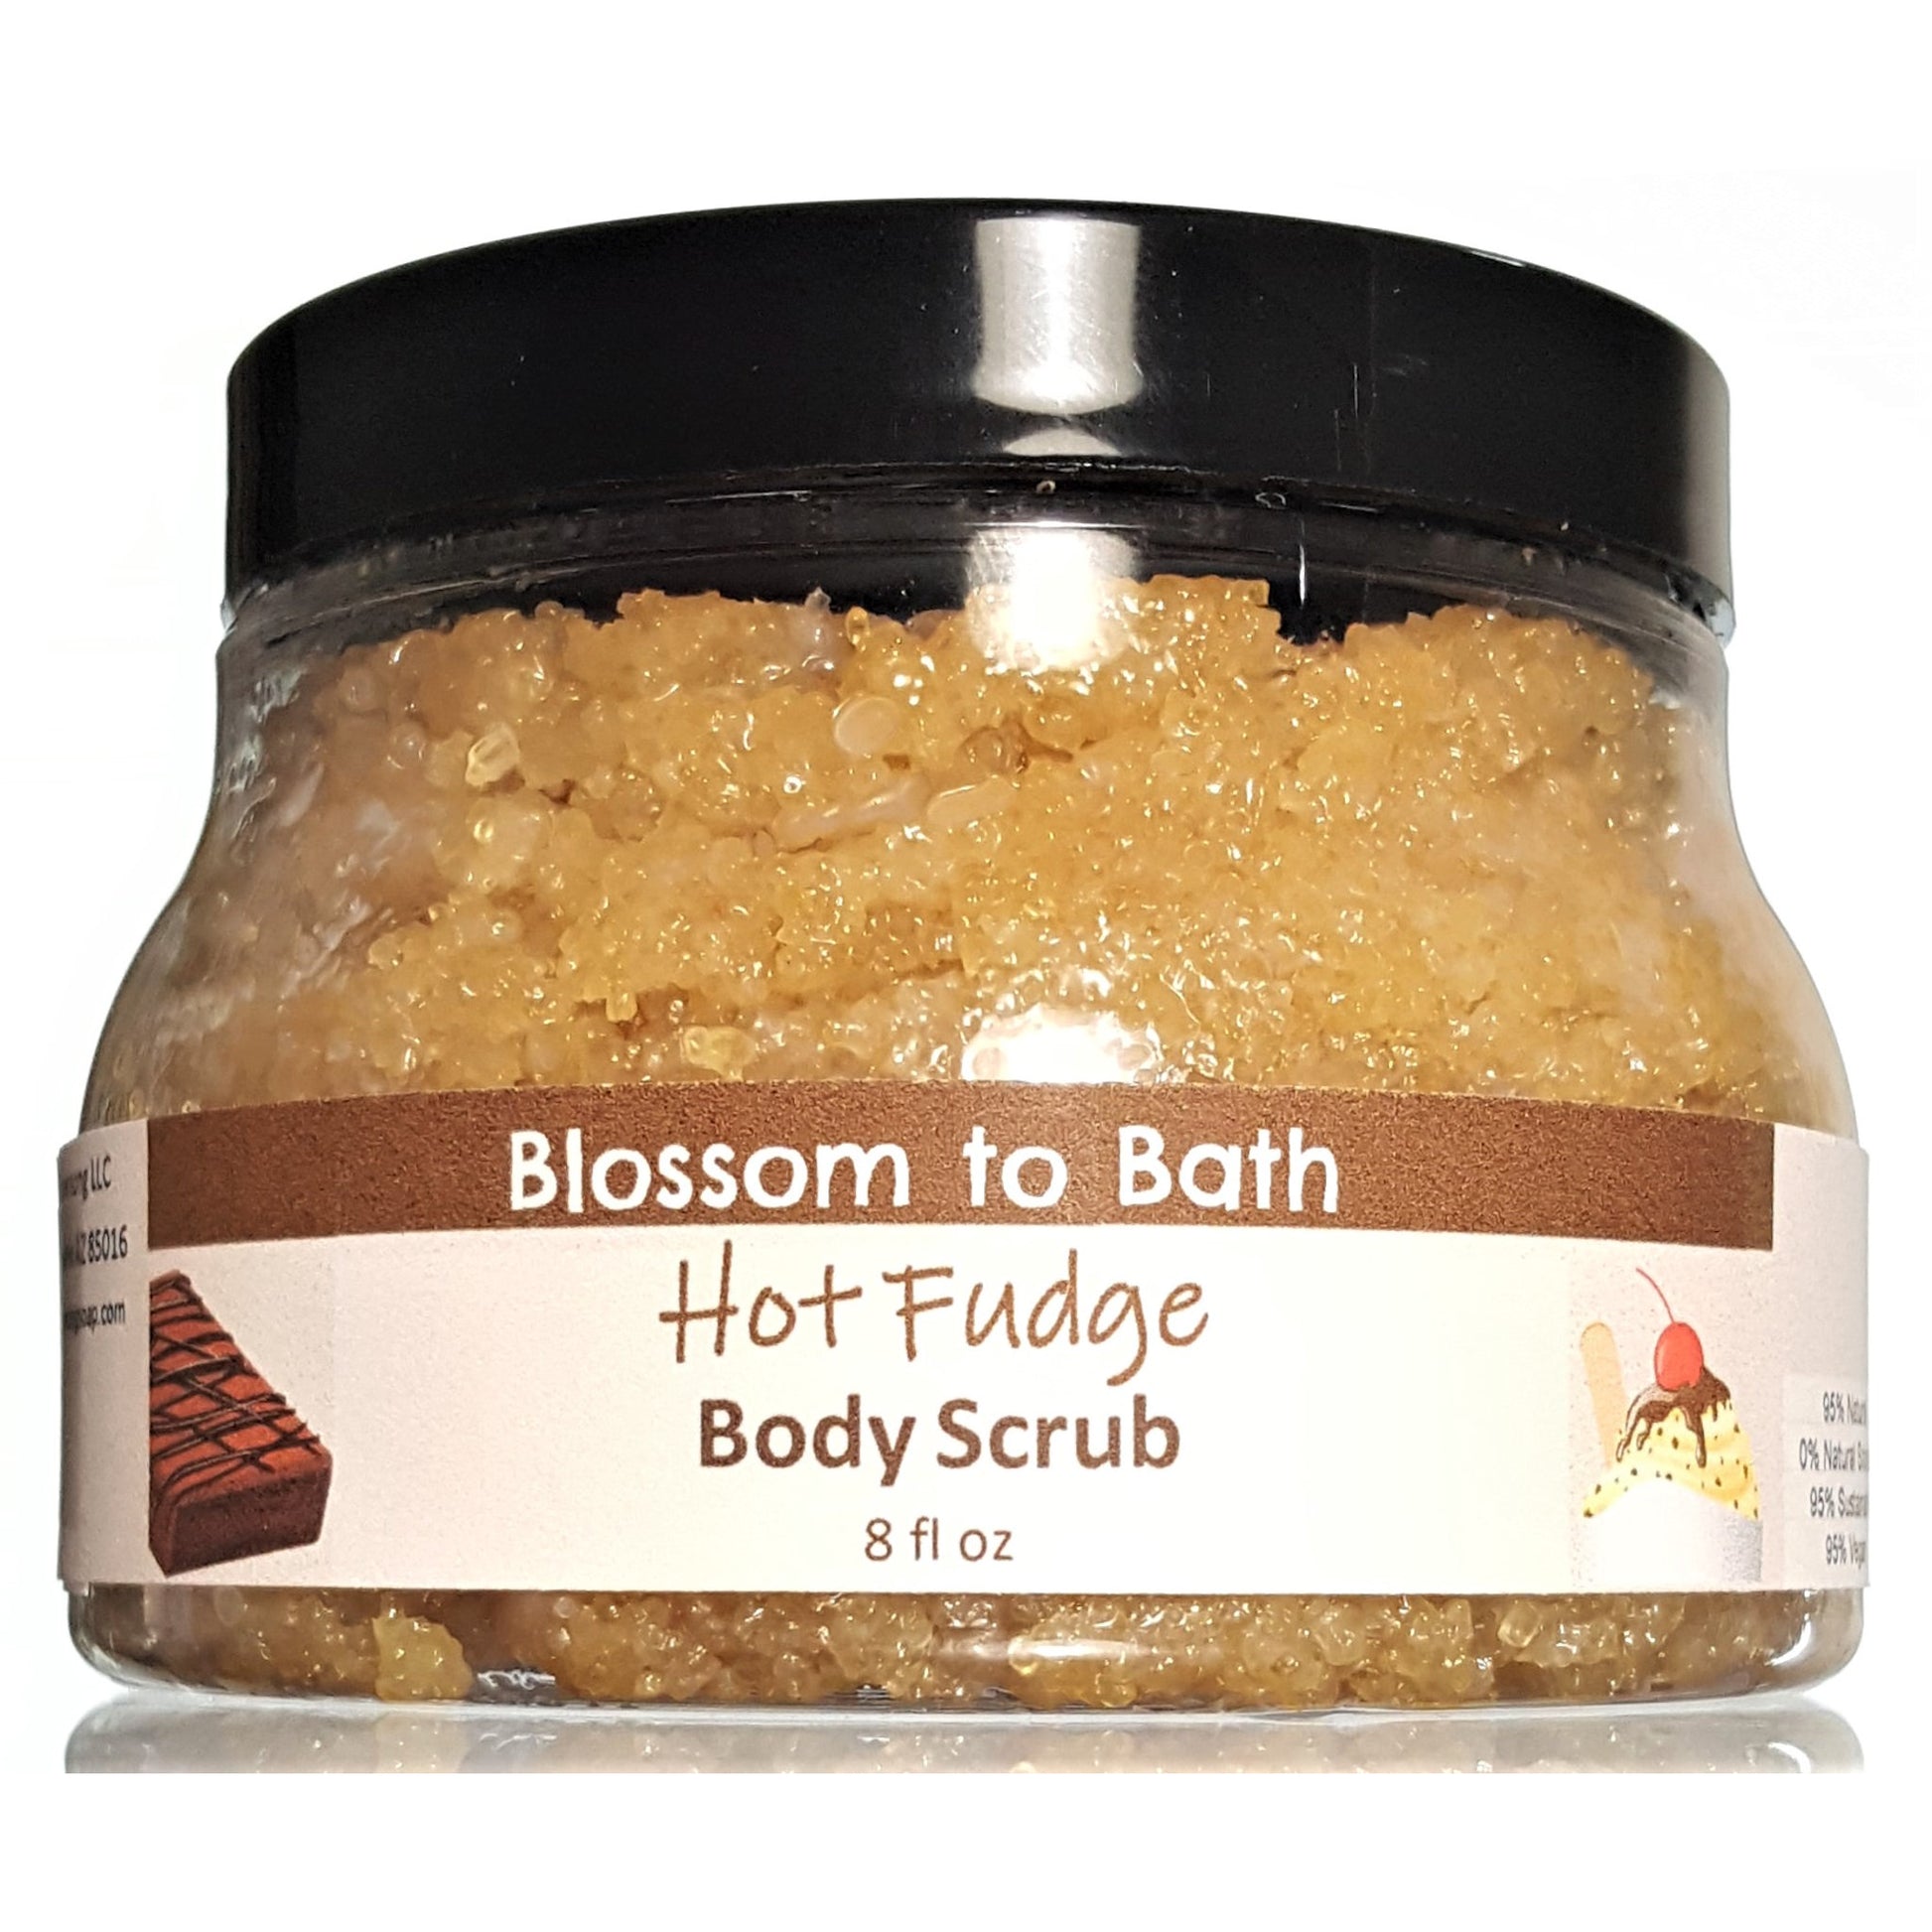 Buy Blossom to Bath Hot Fudge Body Scrub from Flowersong Soap Studio.  Large crystal turbinado sugar plus  rich oils conveniently exfoliate and moisturize in one step  The fragrance is three layers deep in rich chocolate.